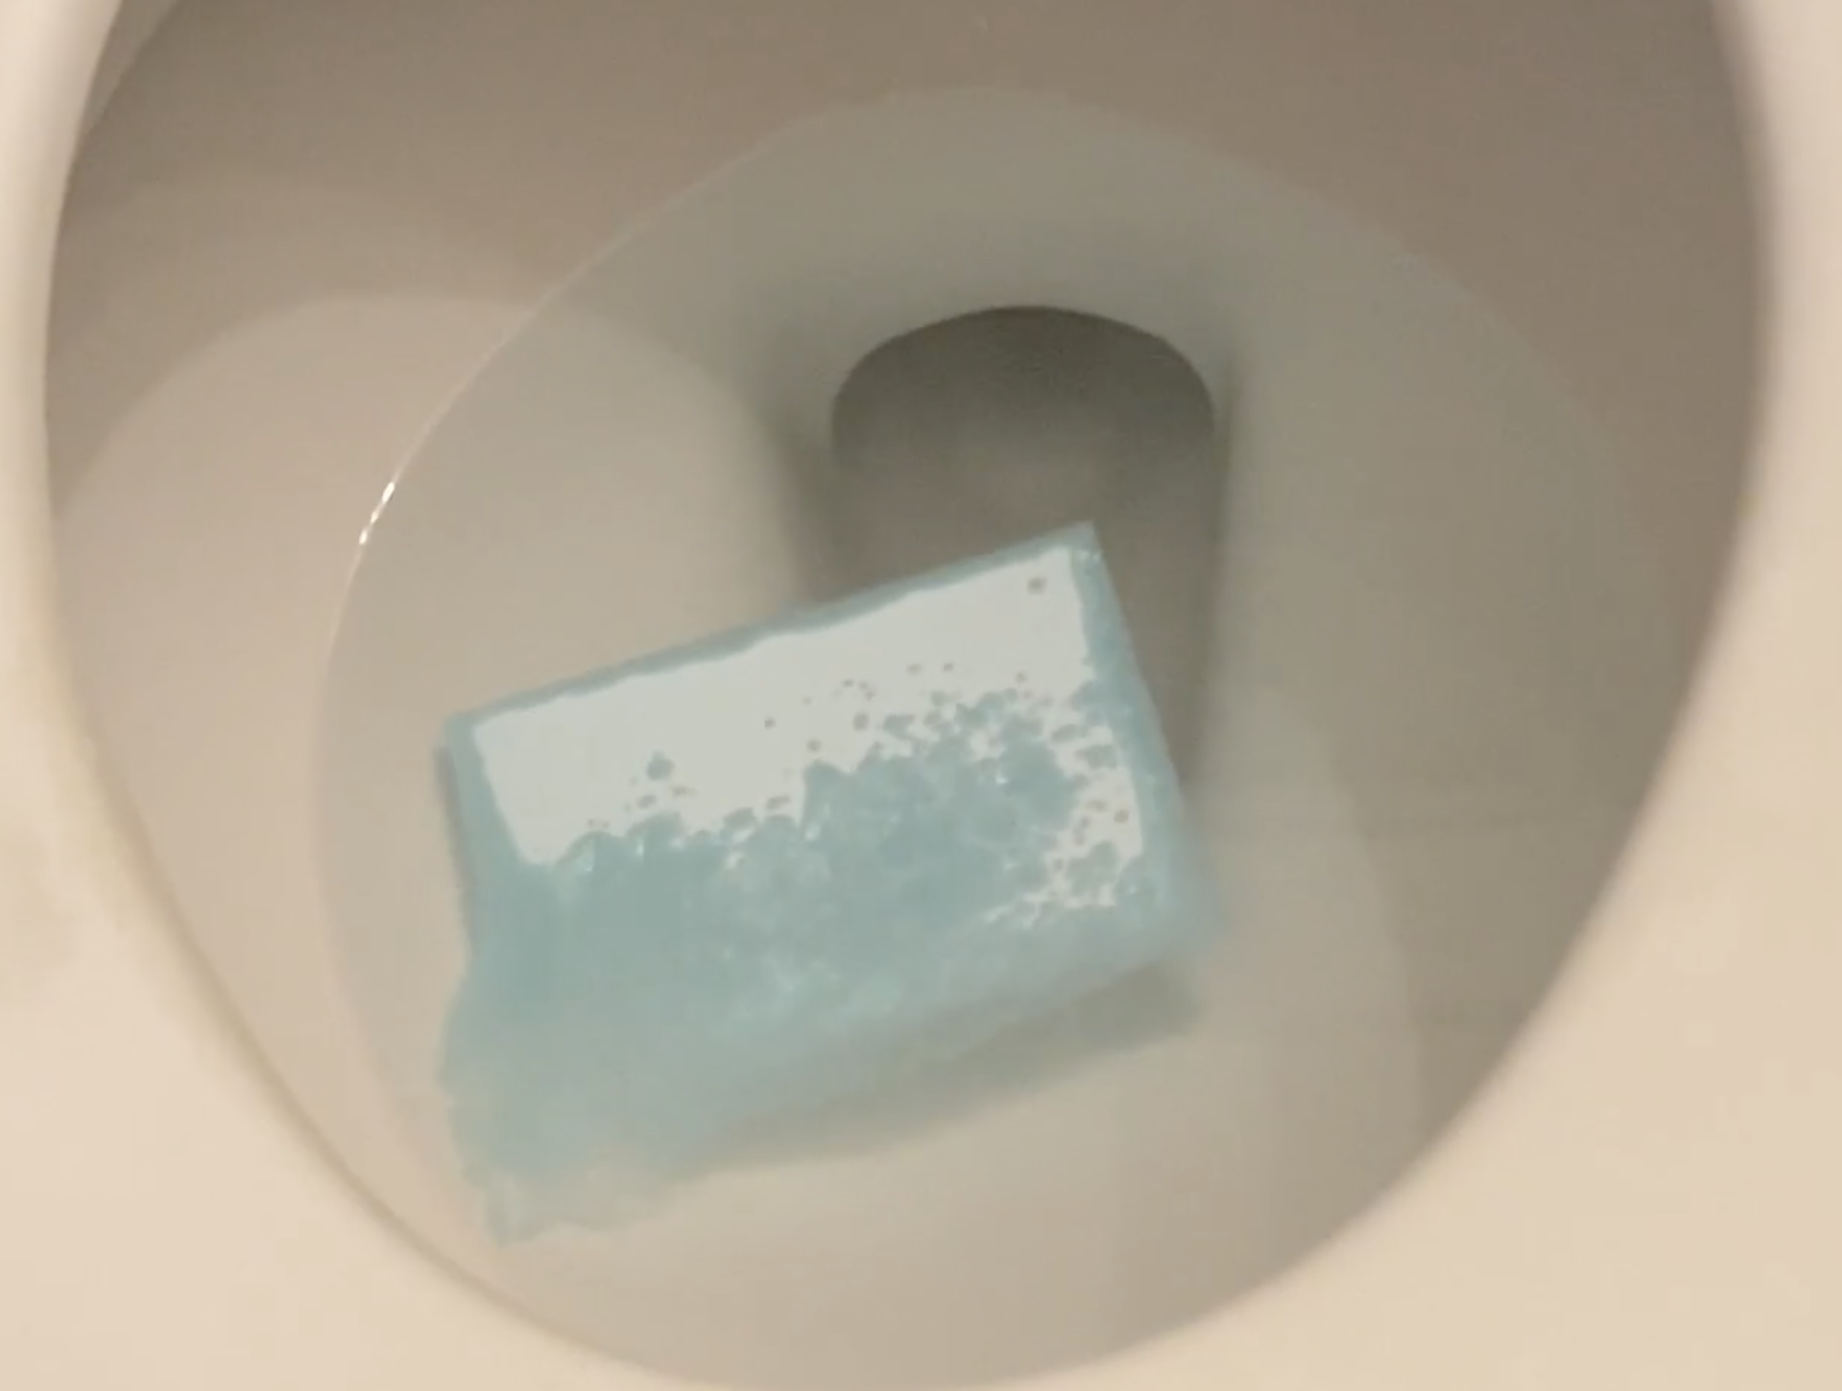 a sheet of the cleaner dissolving in a toilet bowl